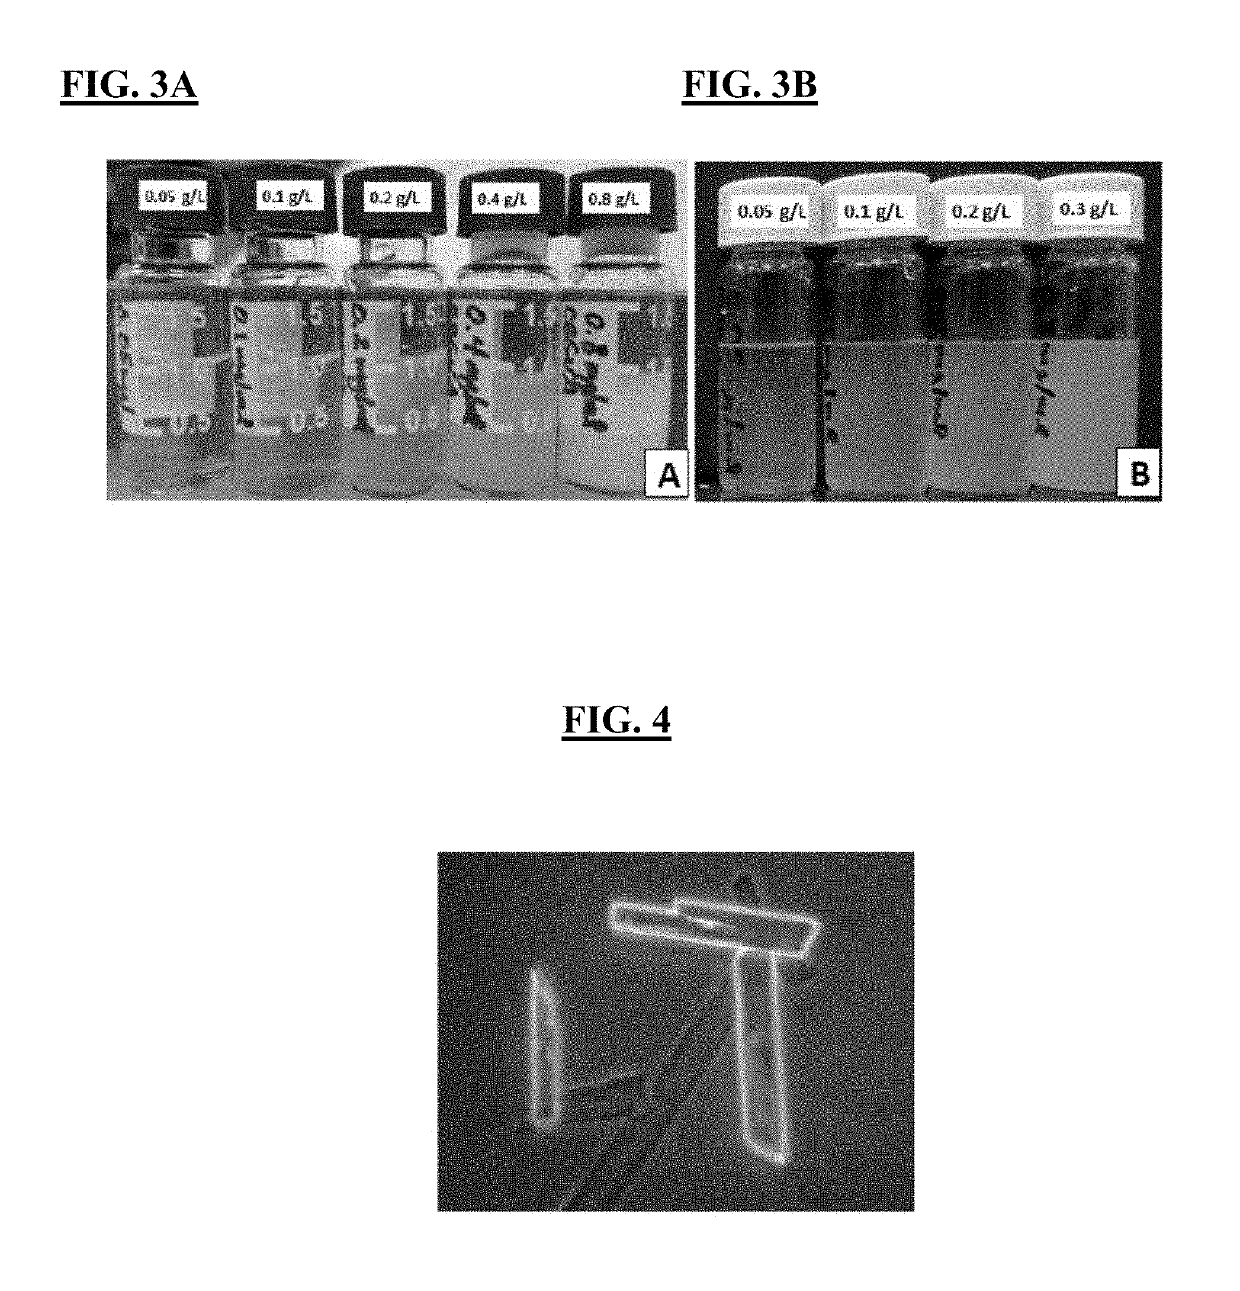 Apparatus, methods and composition for synthesis of cannabinoid compounds